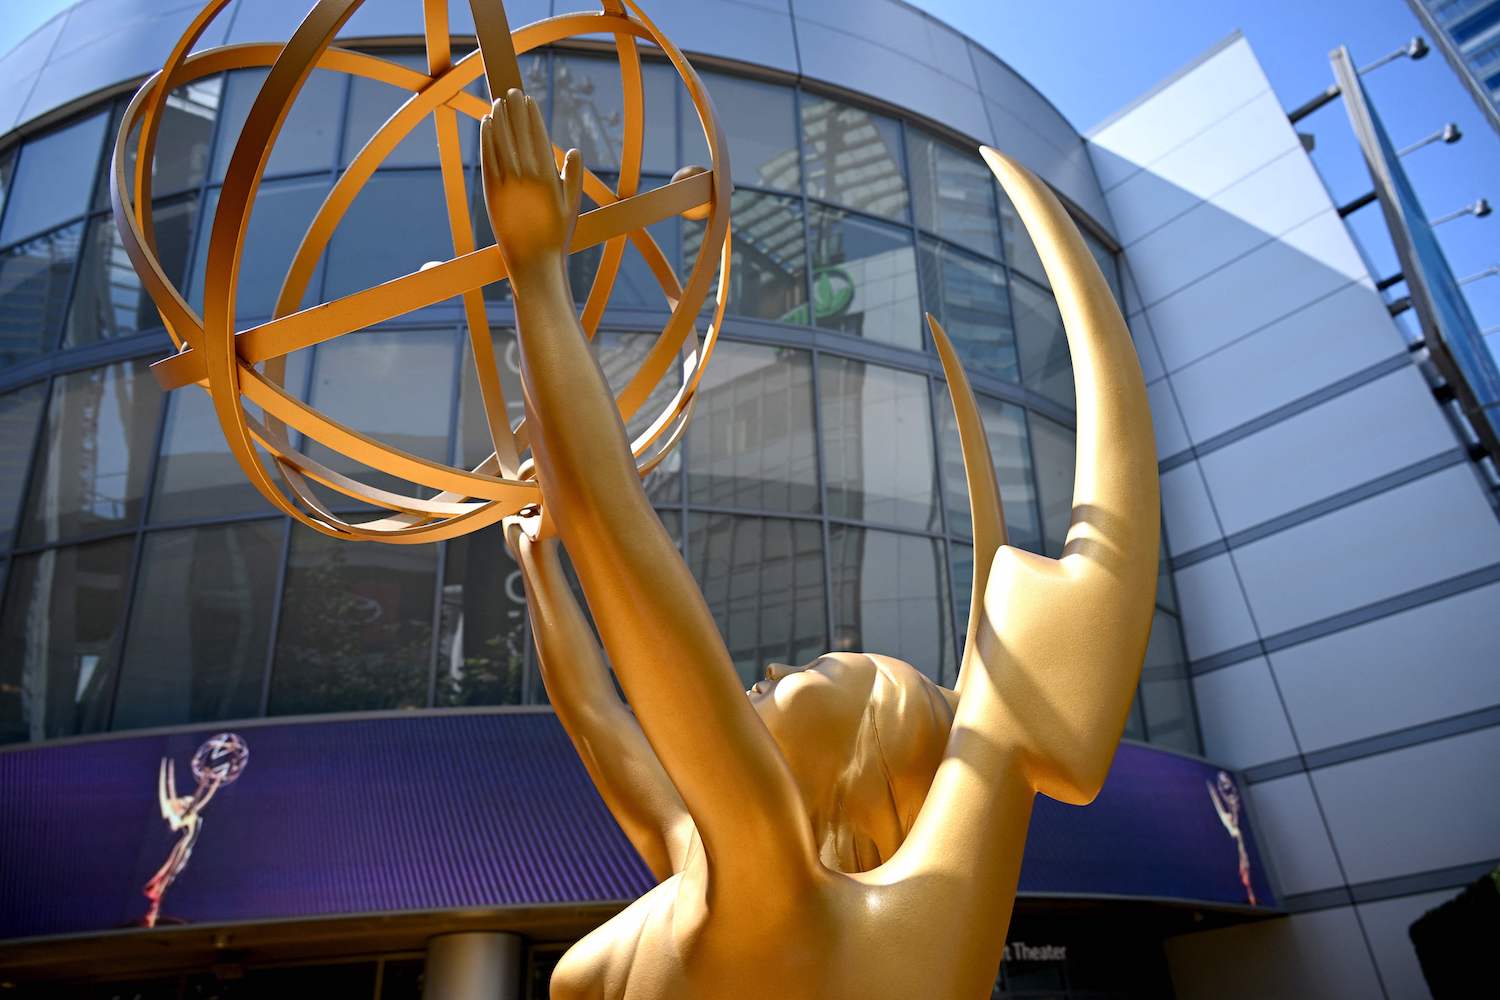 The Emmy statue. The Emmys 2022 winners will be announced on Sept. 12, 2022.